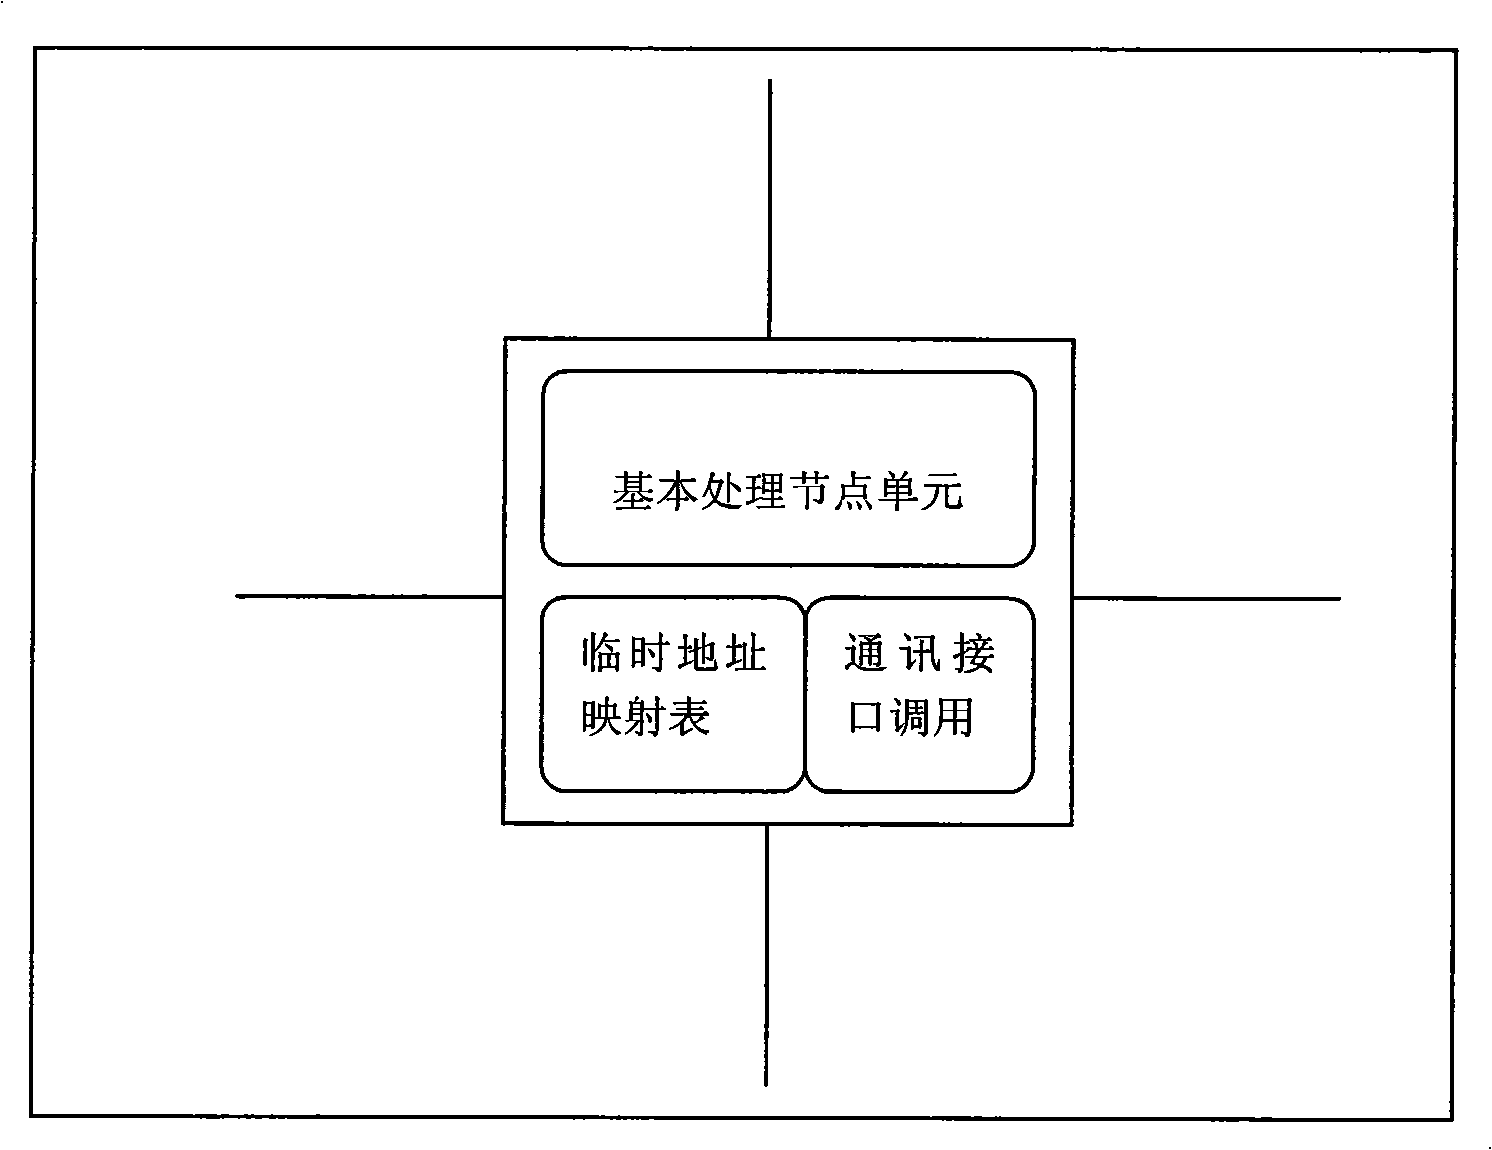 Implementation method of communication module of on-chip distributed operating system